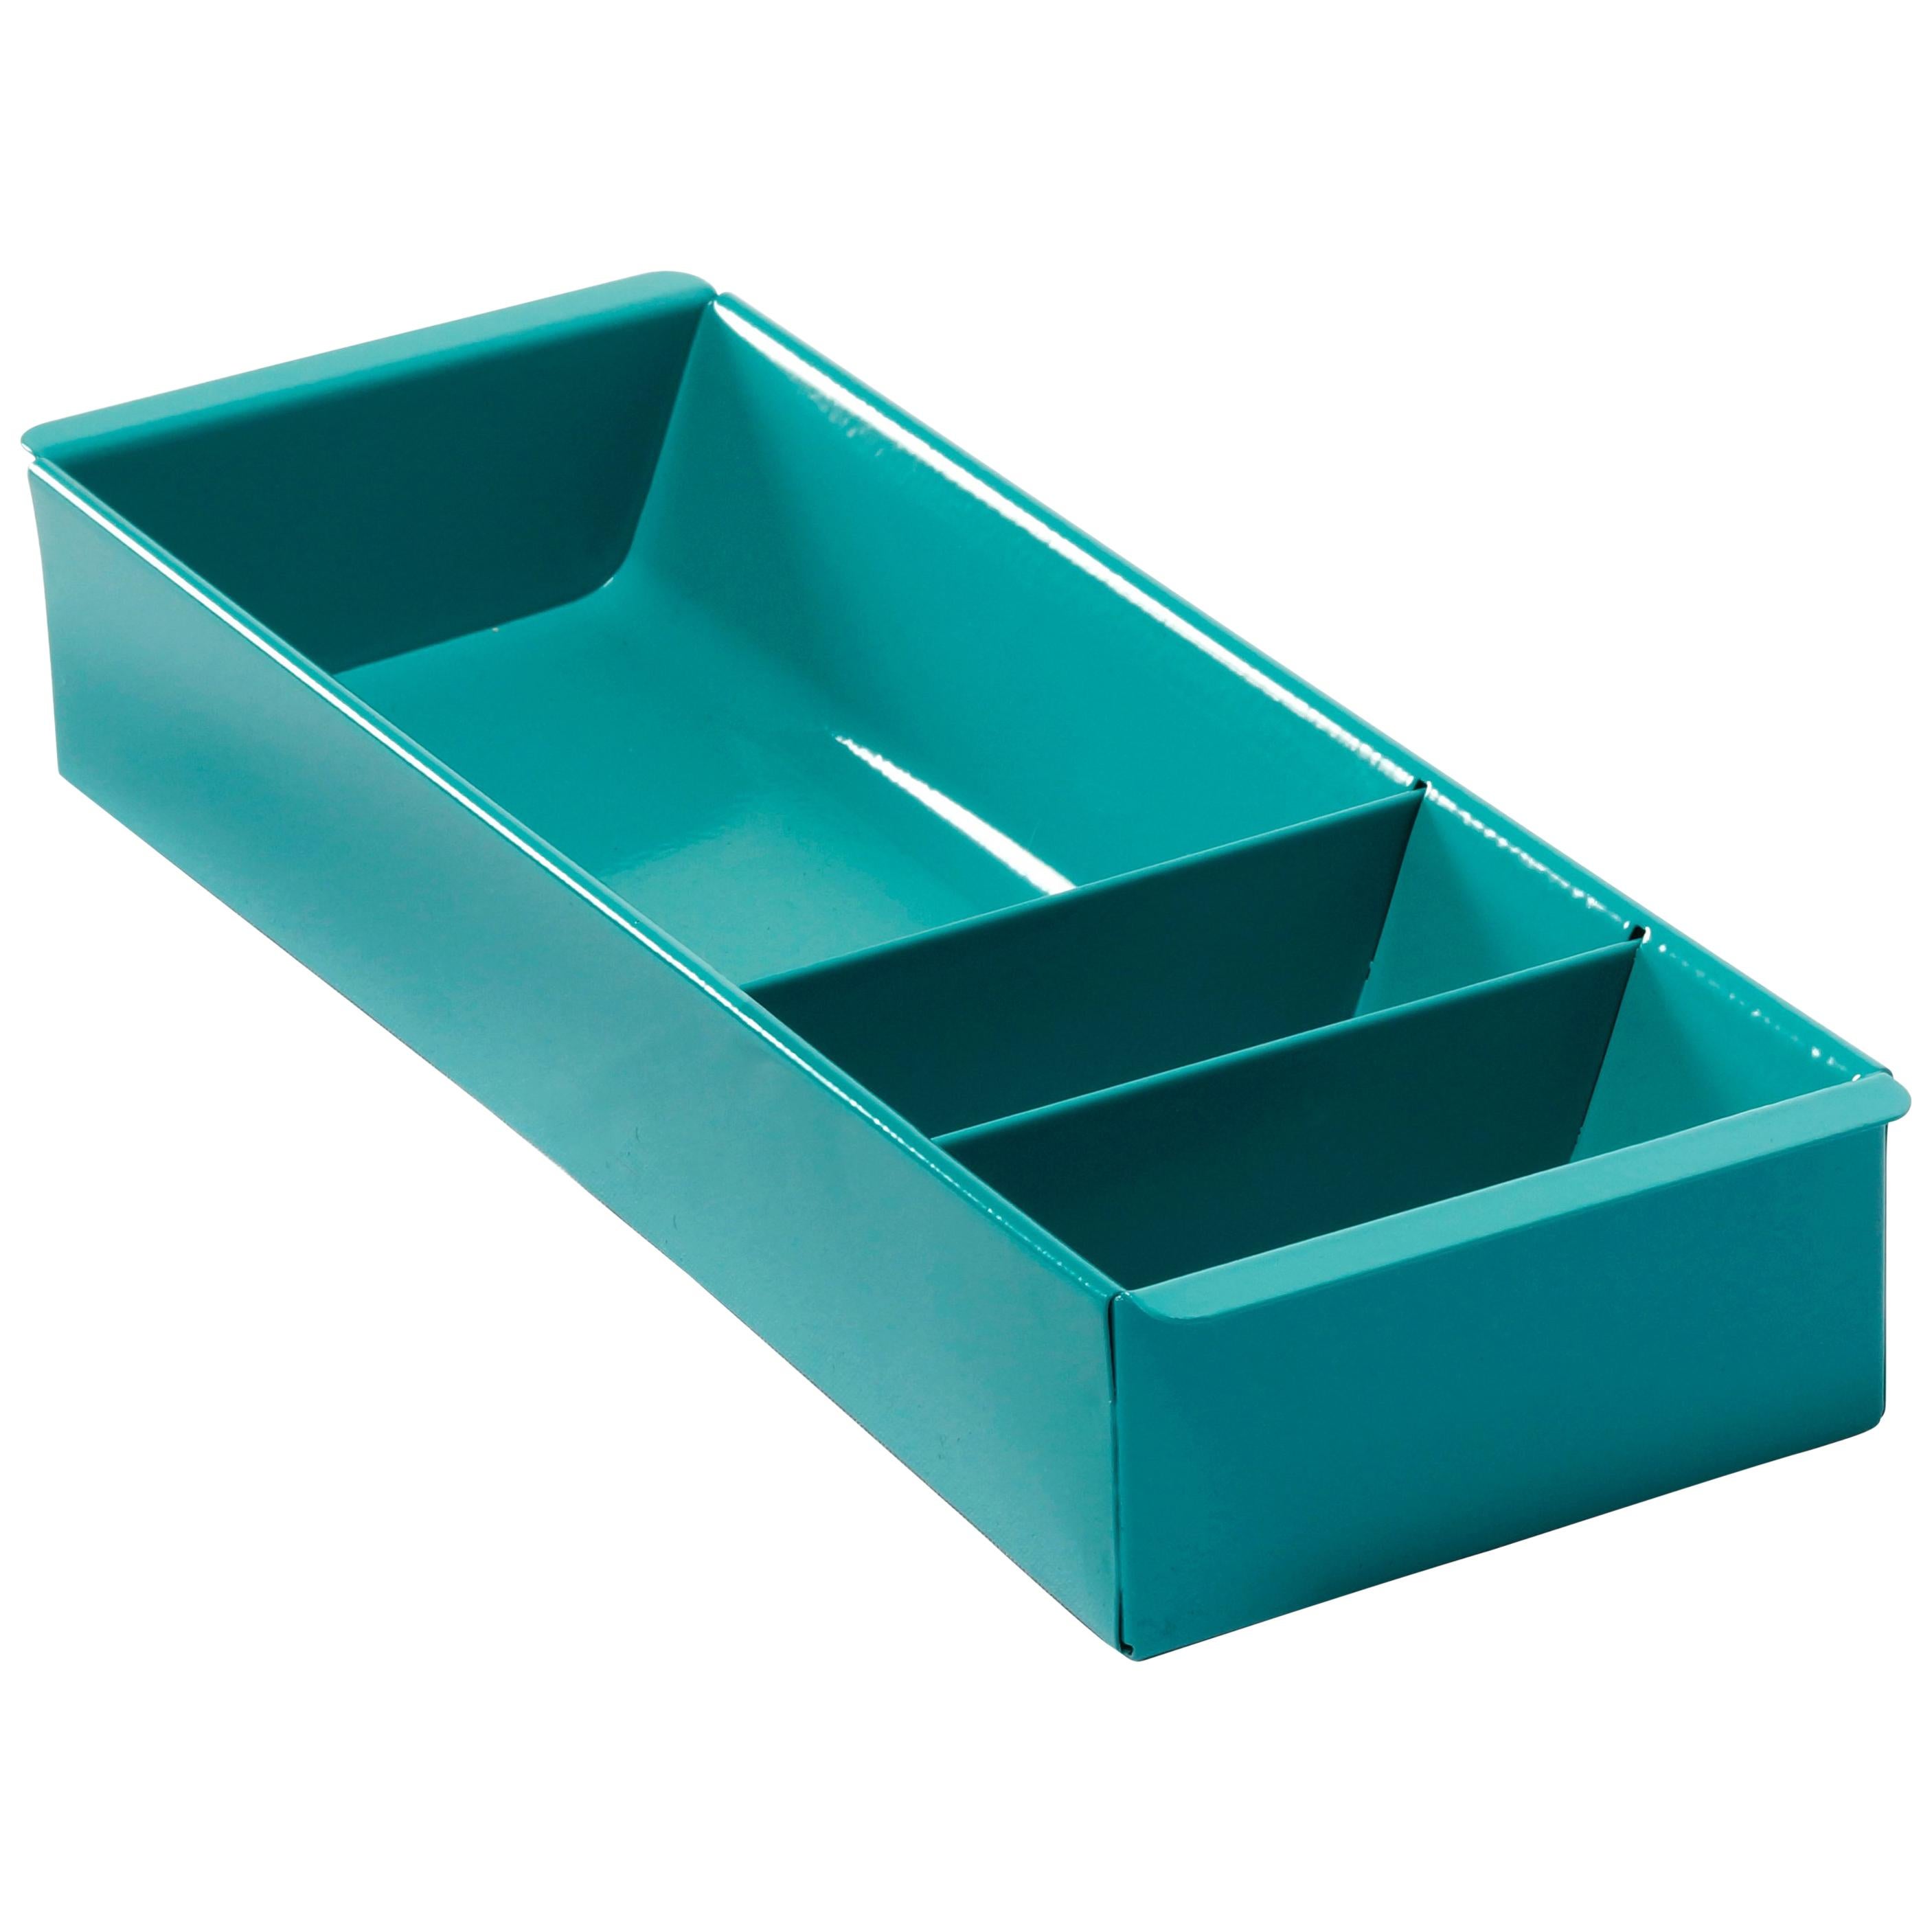 Steel Tanker Drawer Insert Repurposed as Organizer, Refinished in Turquoise